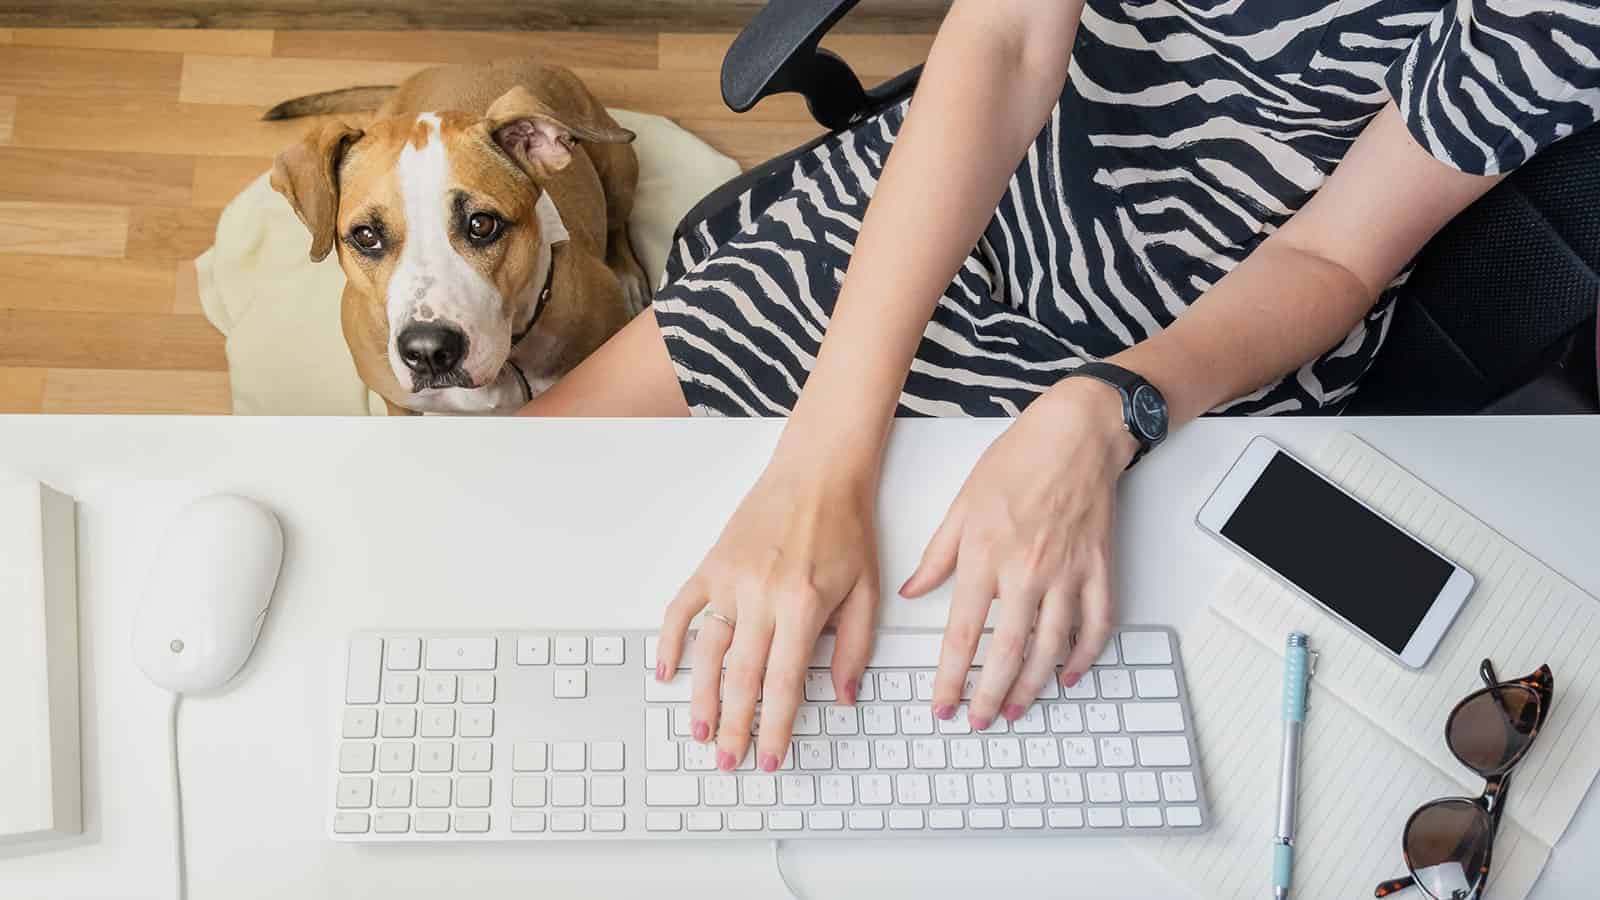 Researchers Reveal How Having A Dog At Work Boosts Productivity and Reduces Stress